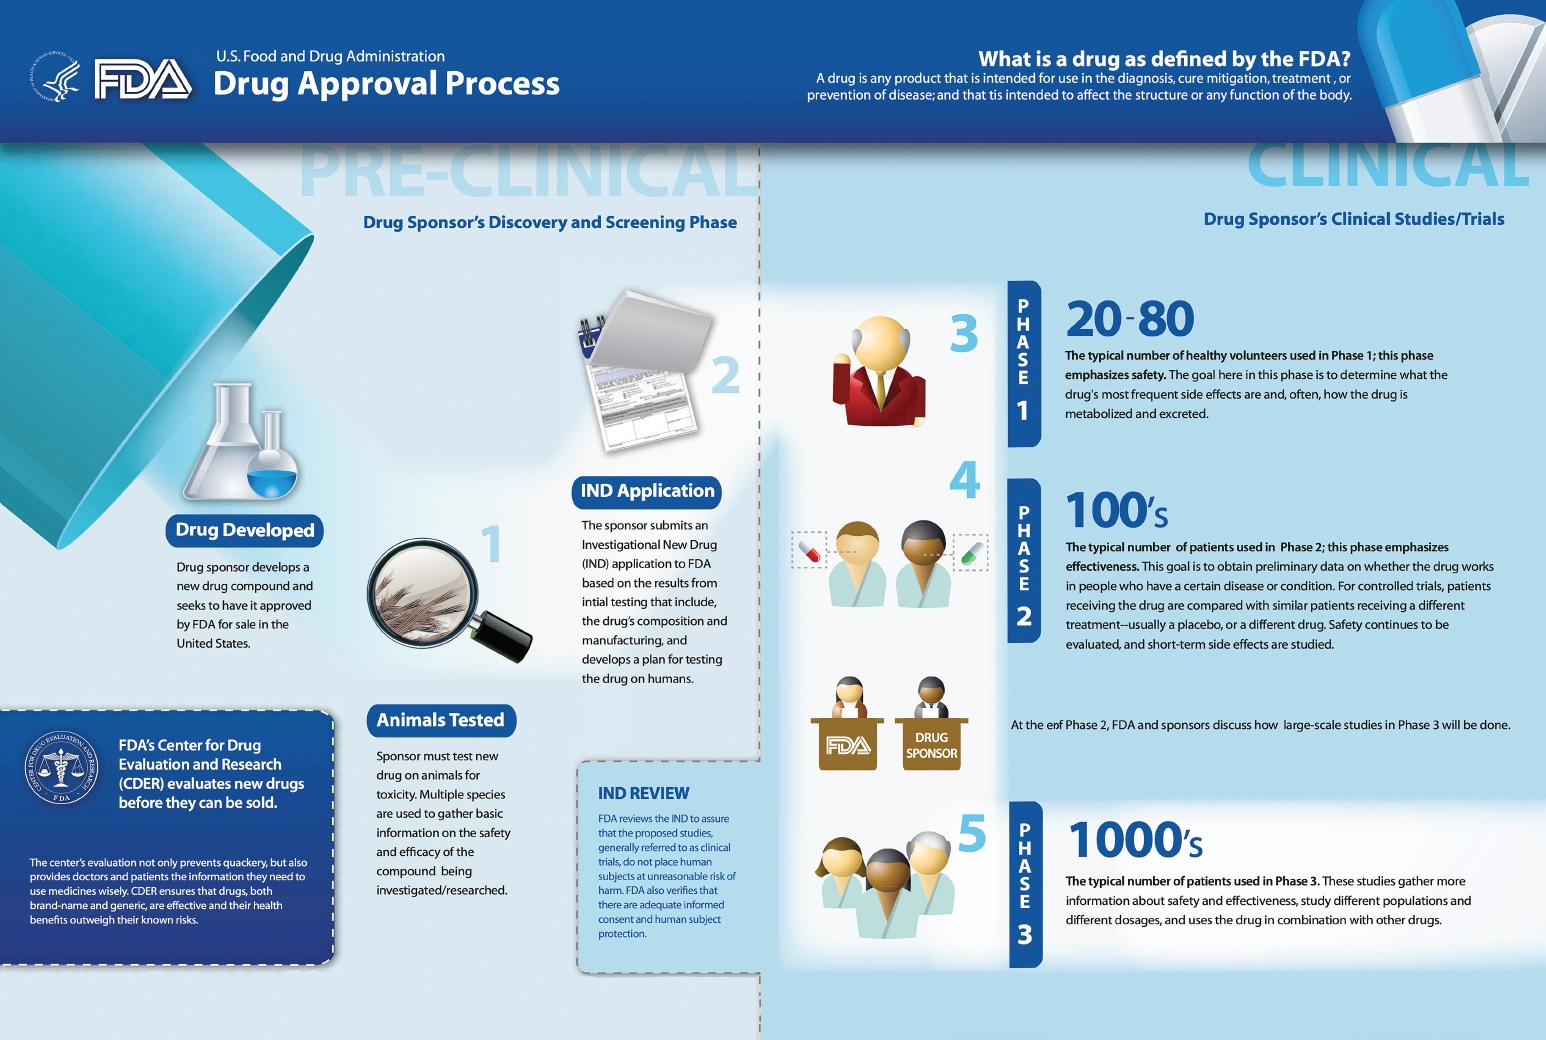 FDA drug approval process infographic